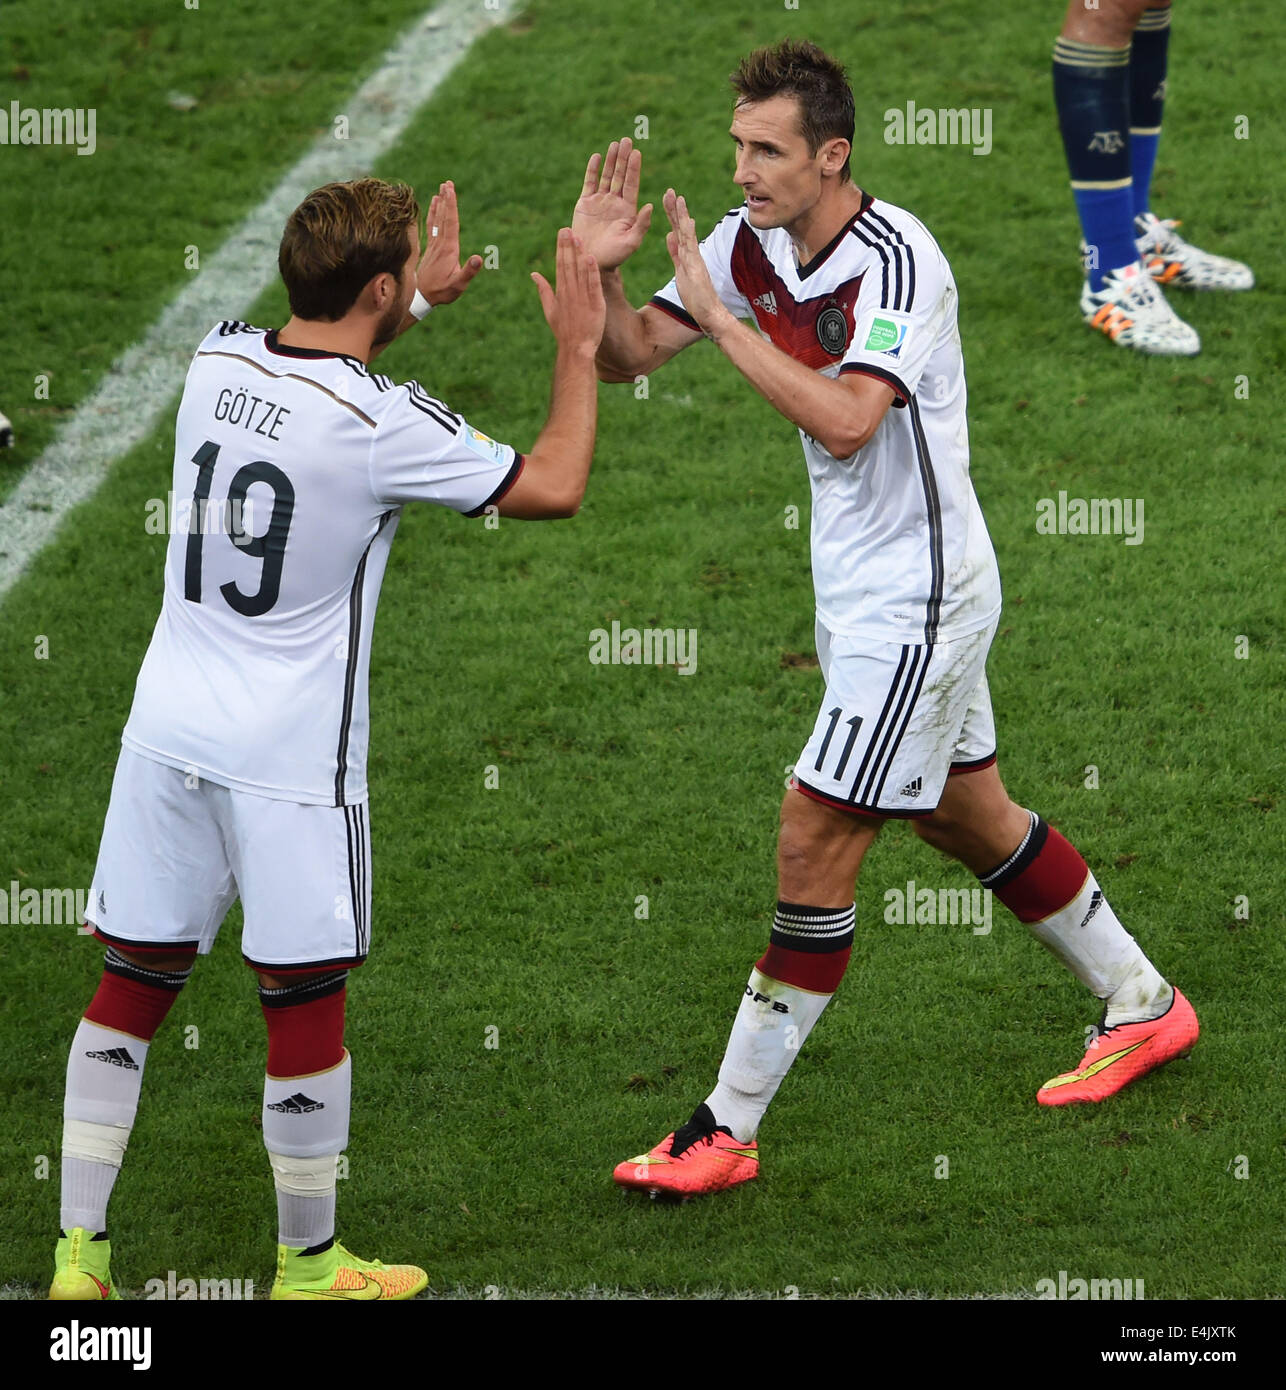 Rio De Janeiro, Brazil. 13th July, 2014. Germany's Miroslav Klose (R) is substituted by Mario Gotze (L) during the final match between Germany and Argentina of 2014 FIFA World Cup at the Estadio do Maracana Stadium in Rio de Janeiro, Brazil, on July 13, 2014. Credit:  Li Ga/Xinhua/Alamy Live News Stock Photo